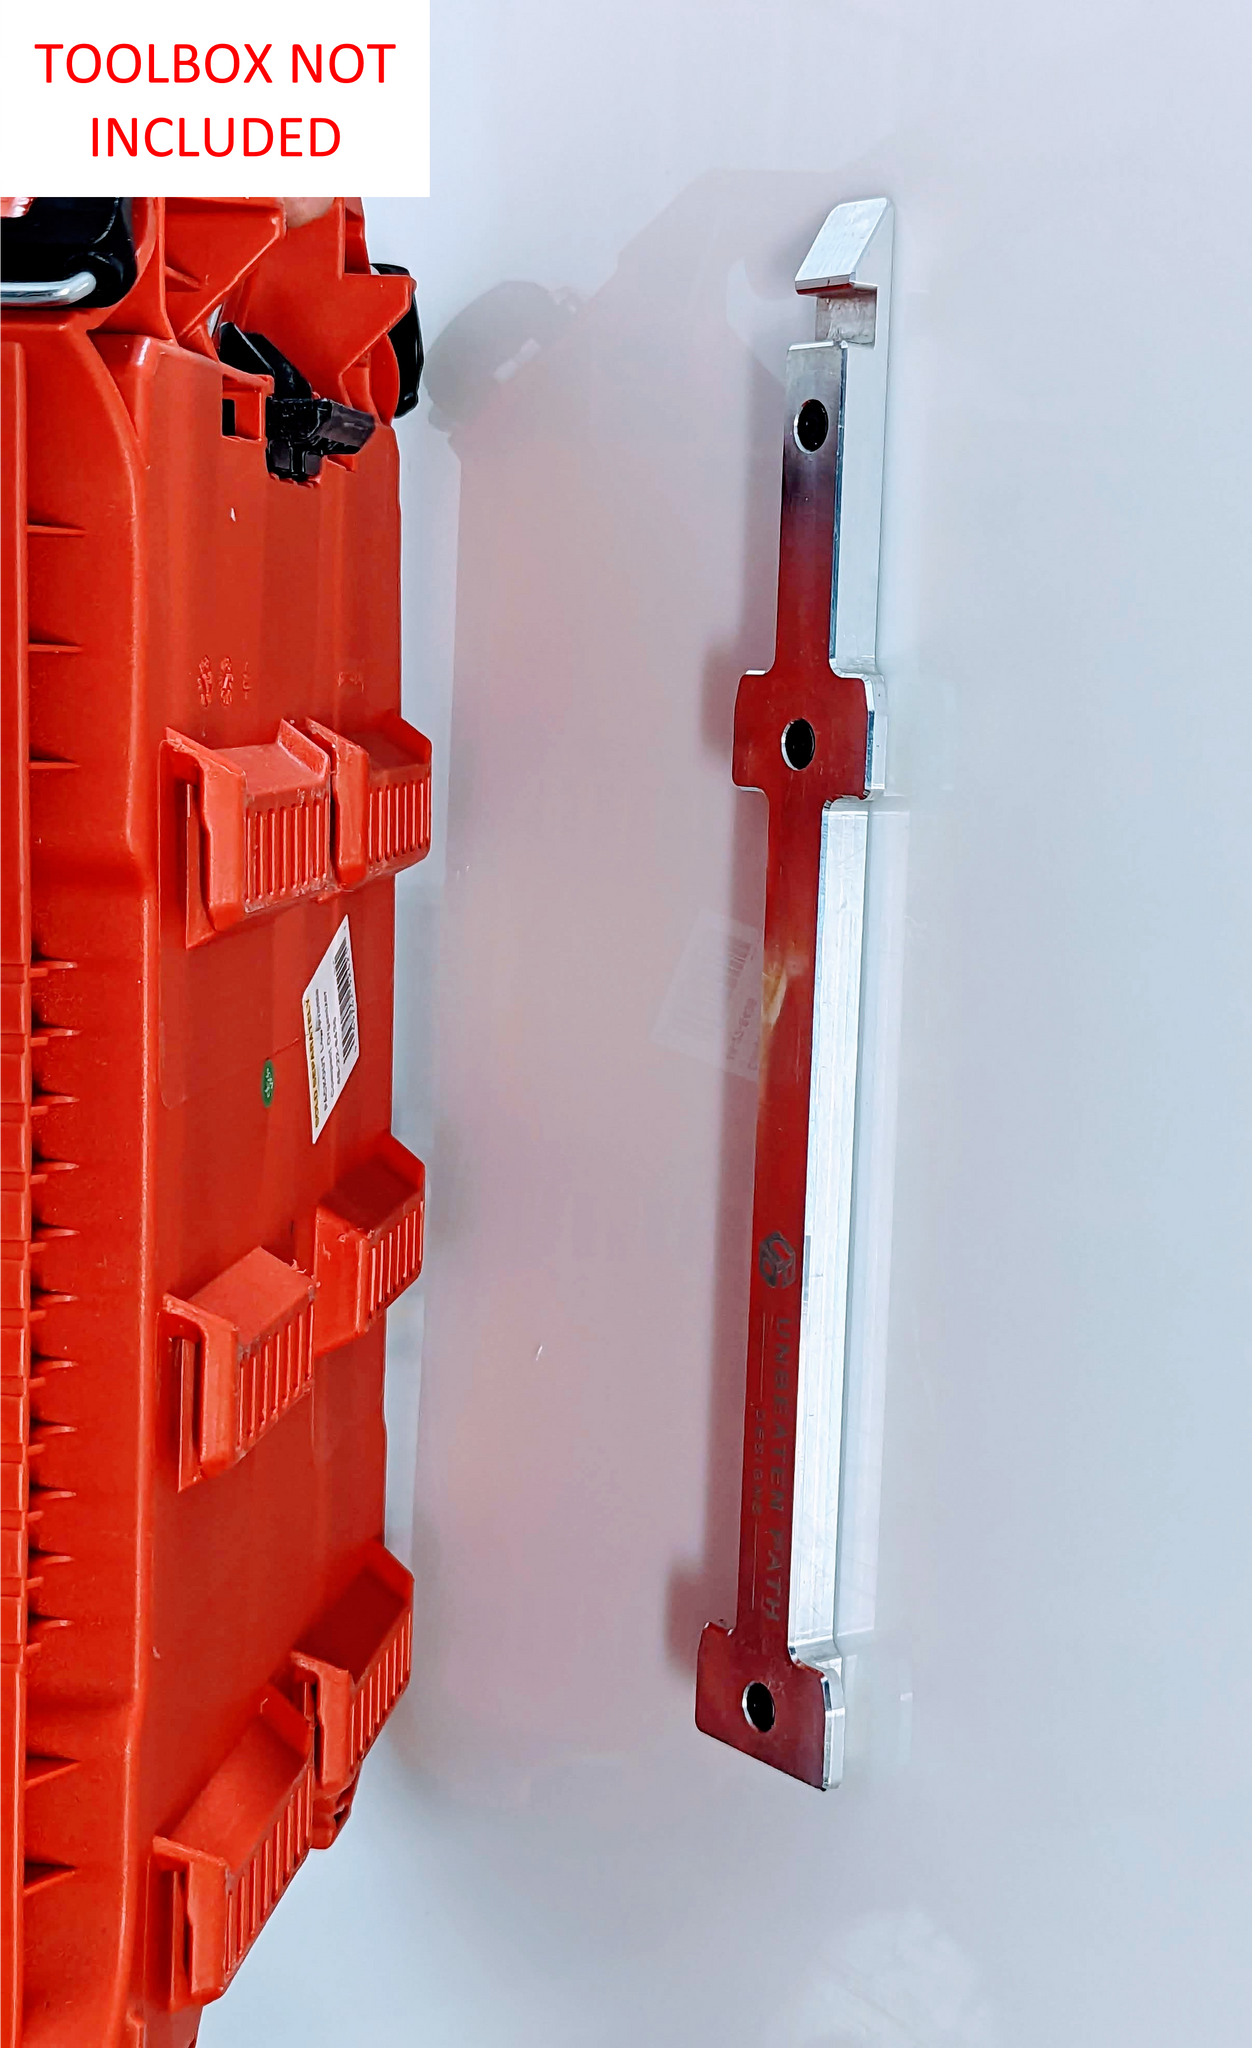 Milwaukee Packout Locking Wall Mount by Unbeaten Path Designs Compact 